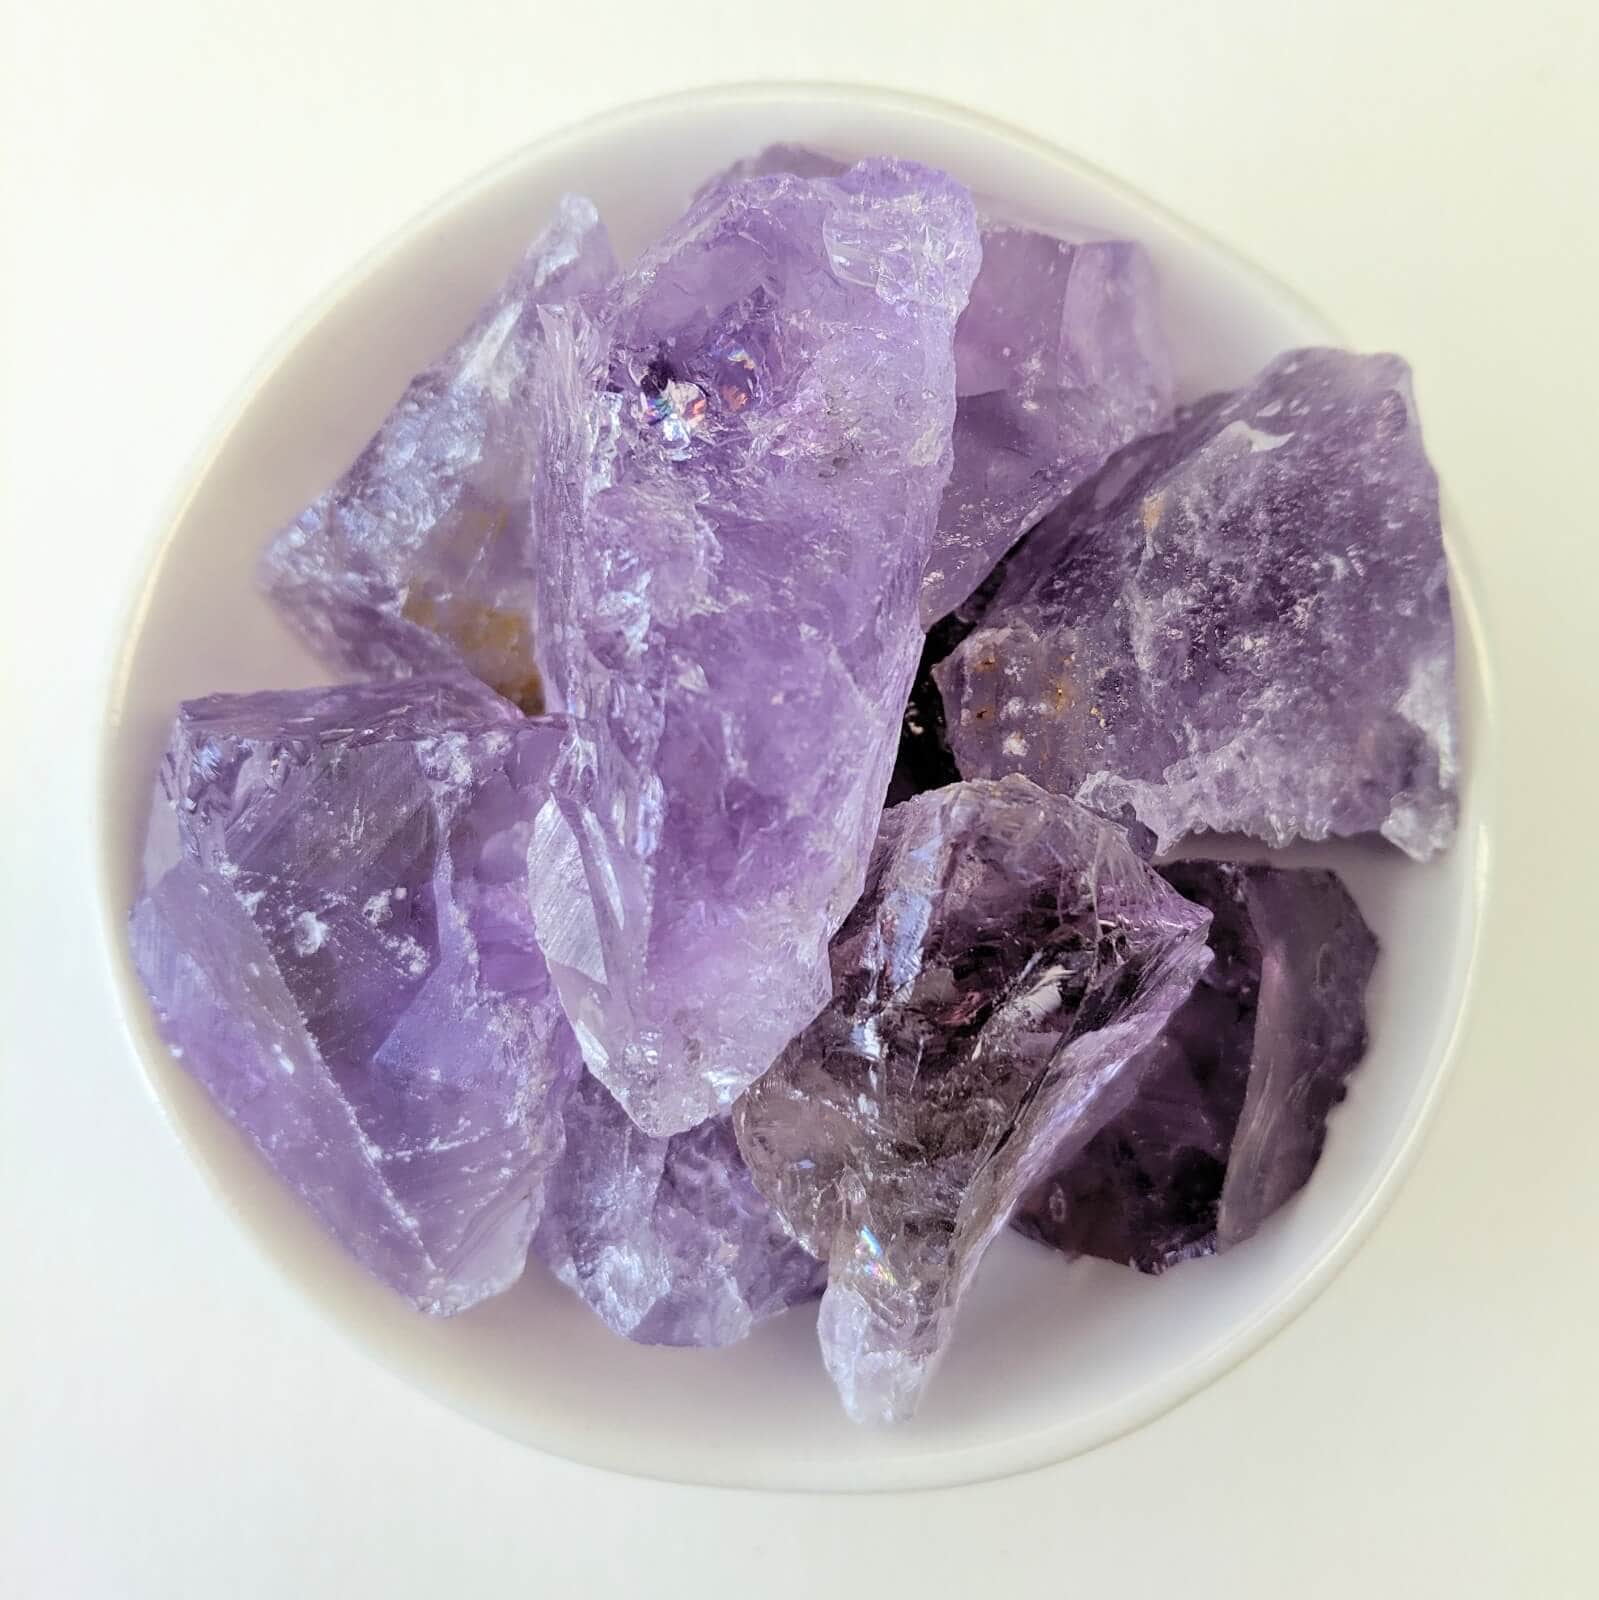 Amethyst Raw Crystals In A White Bowl - Top View